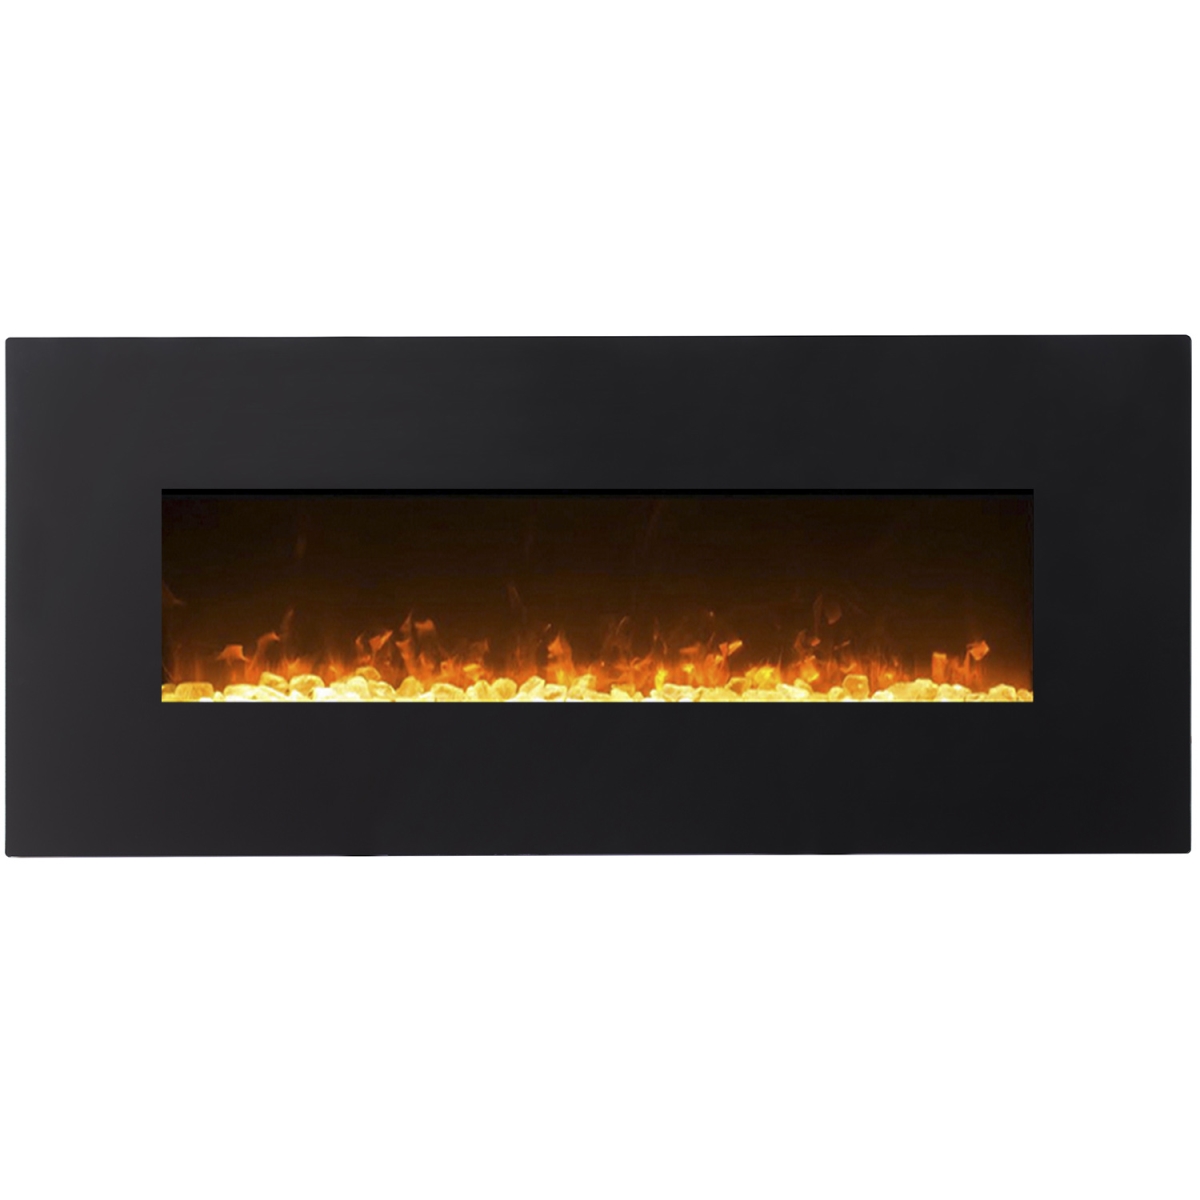 Lw5075bk-gl 50 In. Gl5050ce Lawrence Crystal Electric Wall Mounted Fireplace, Black